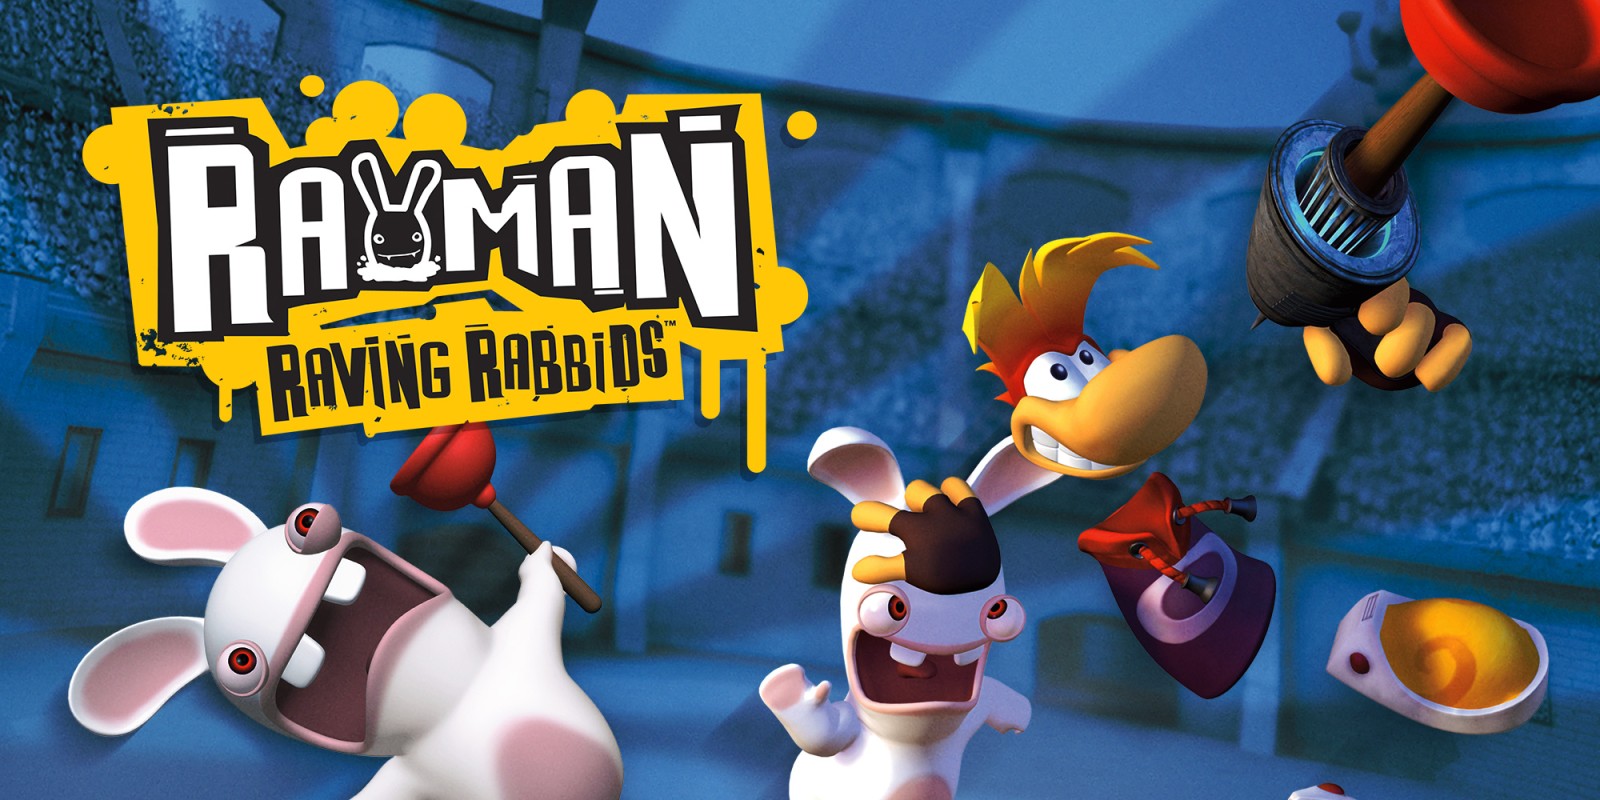 ds rayman raving rabbids tv party